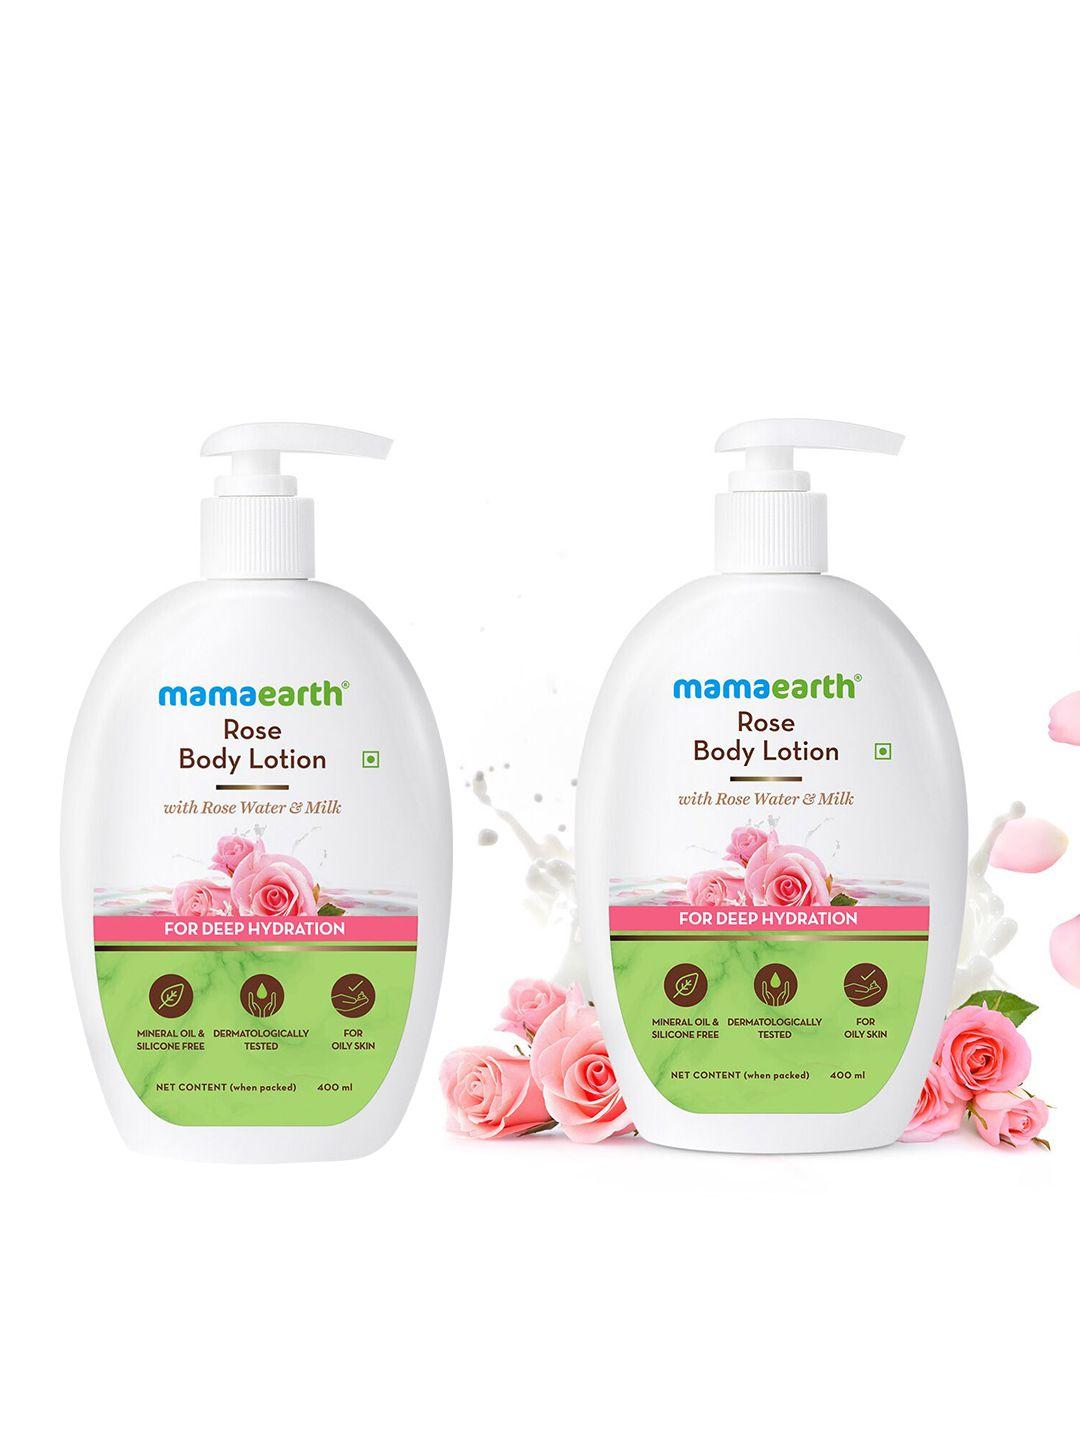 mamaearth rose body lotion with rose water & milk for deep hydration 800 ml